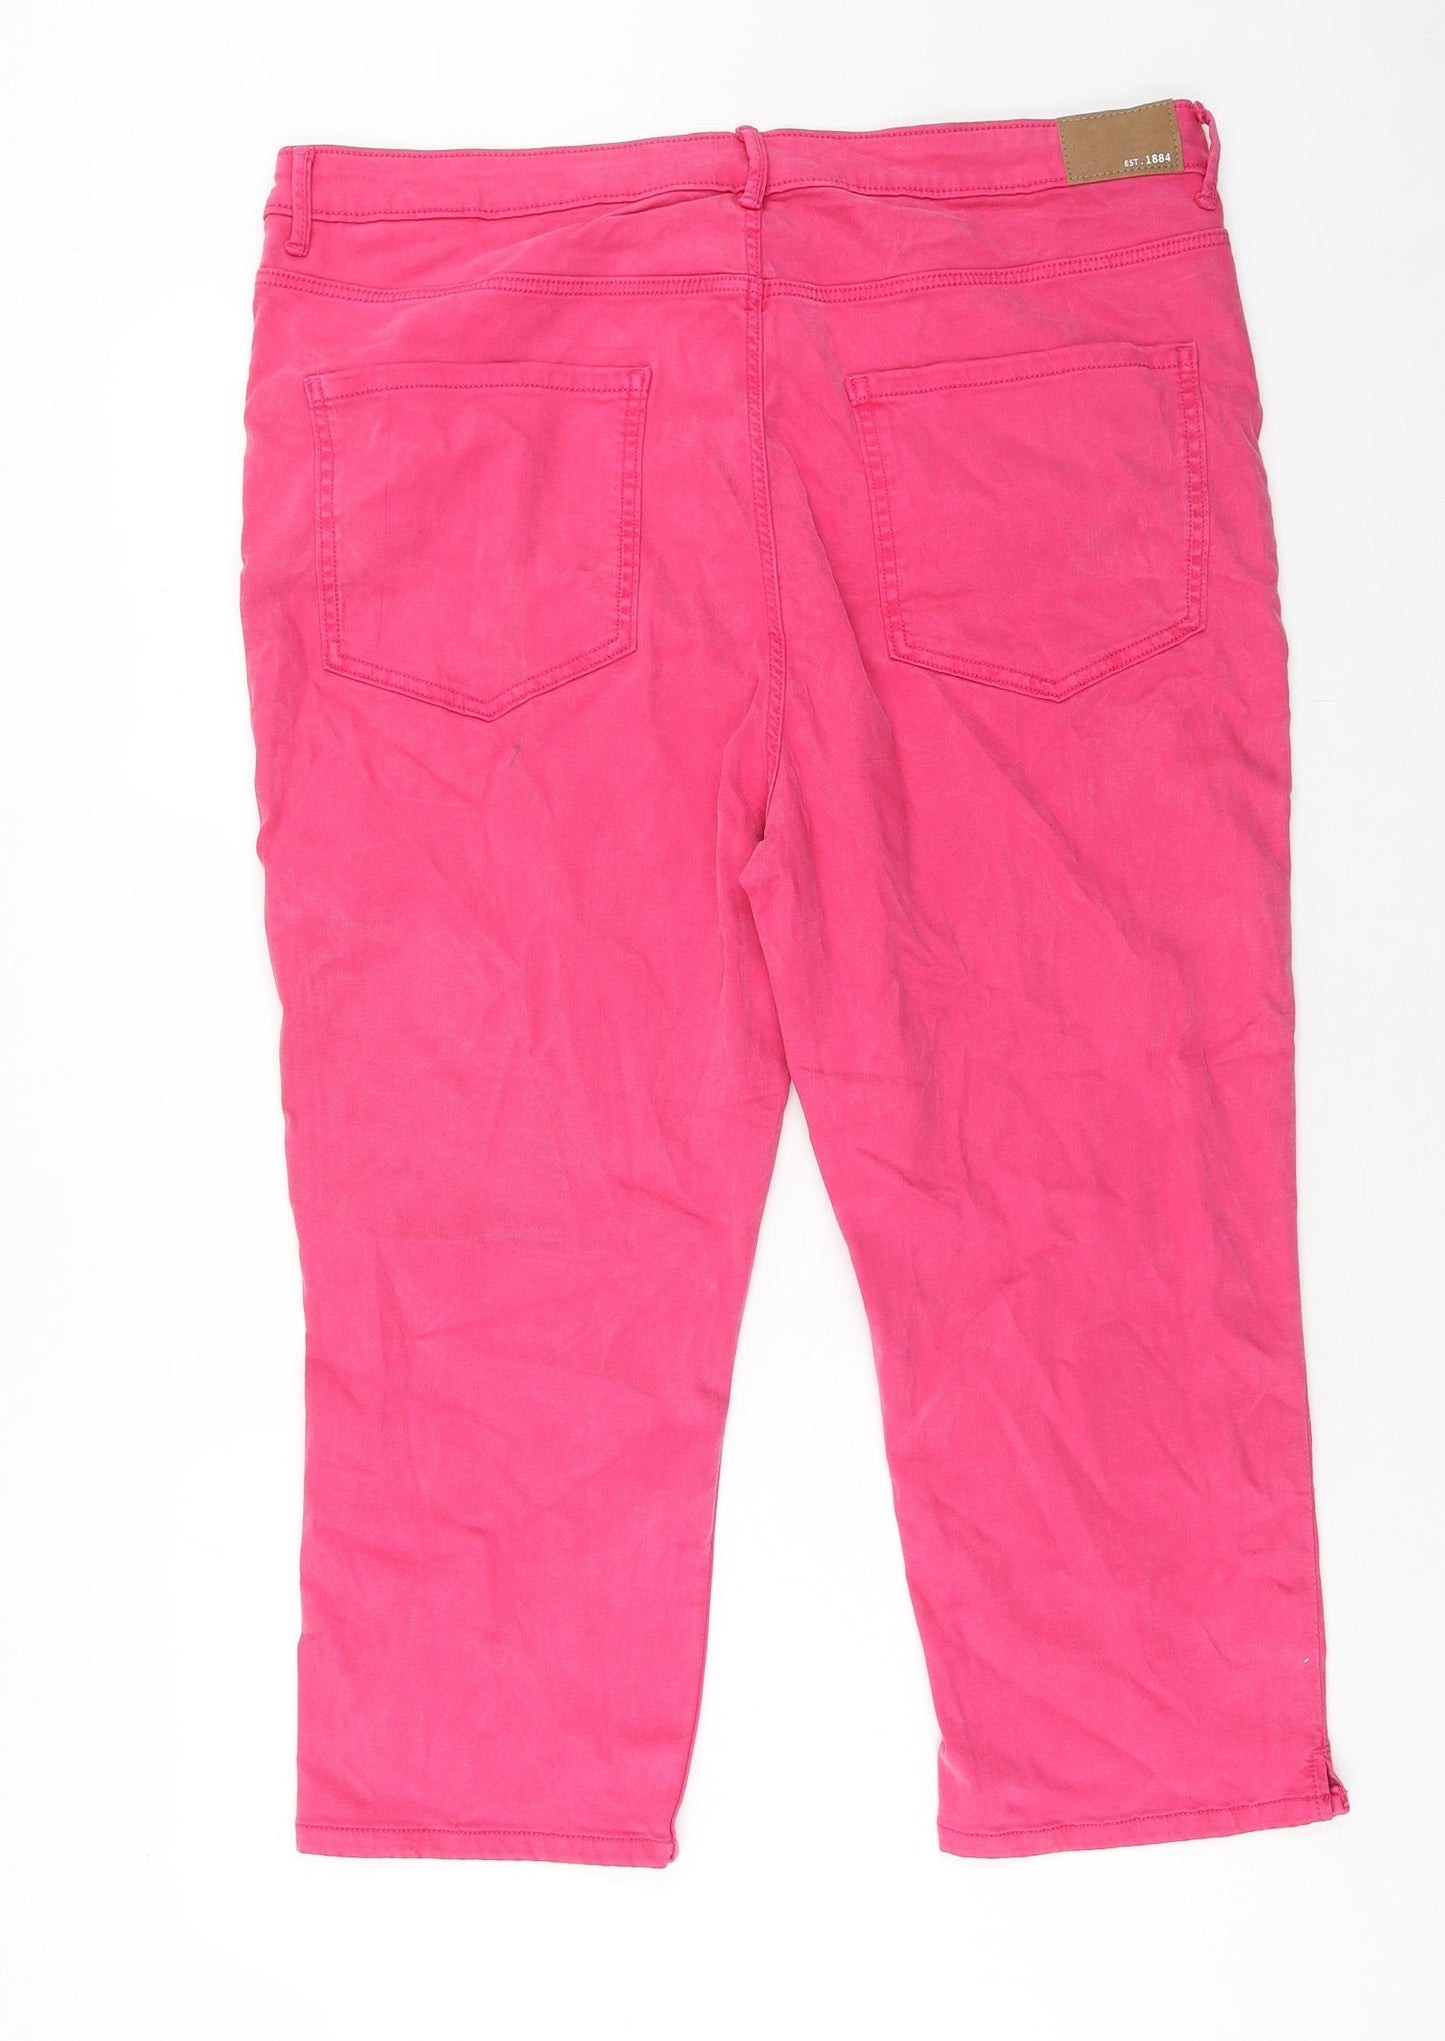 Marks and Spencer Womens Pink Cotton Capri Jeans Size 20 Regular Zip